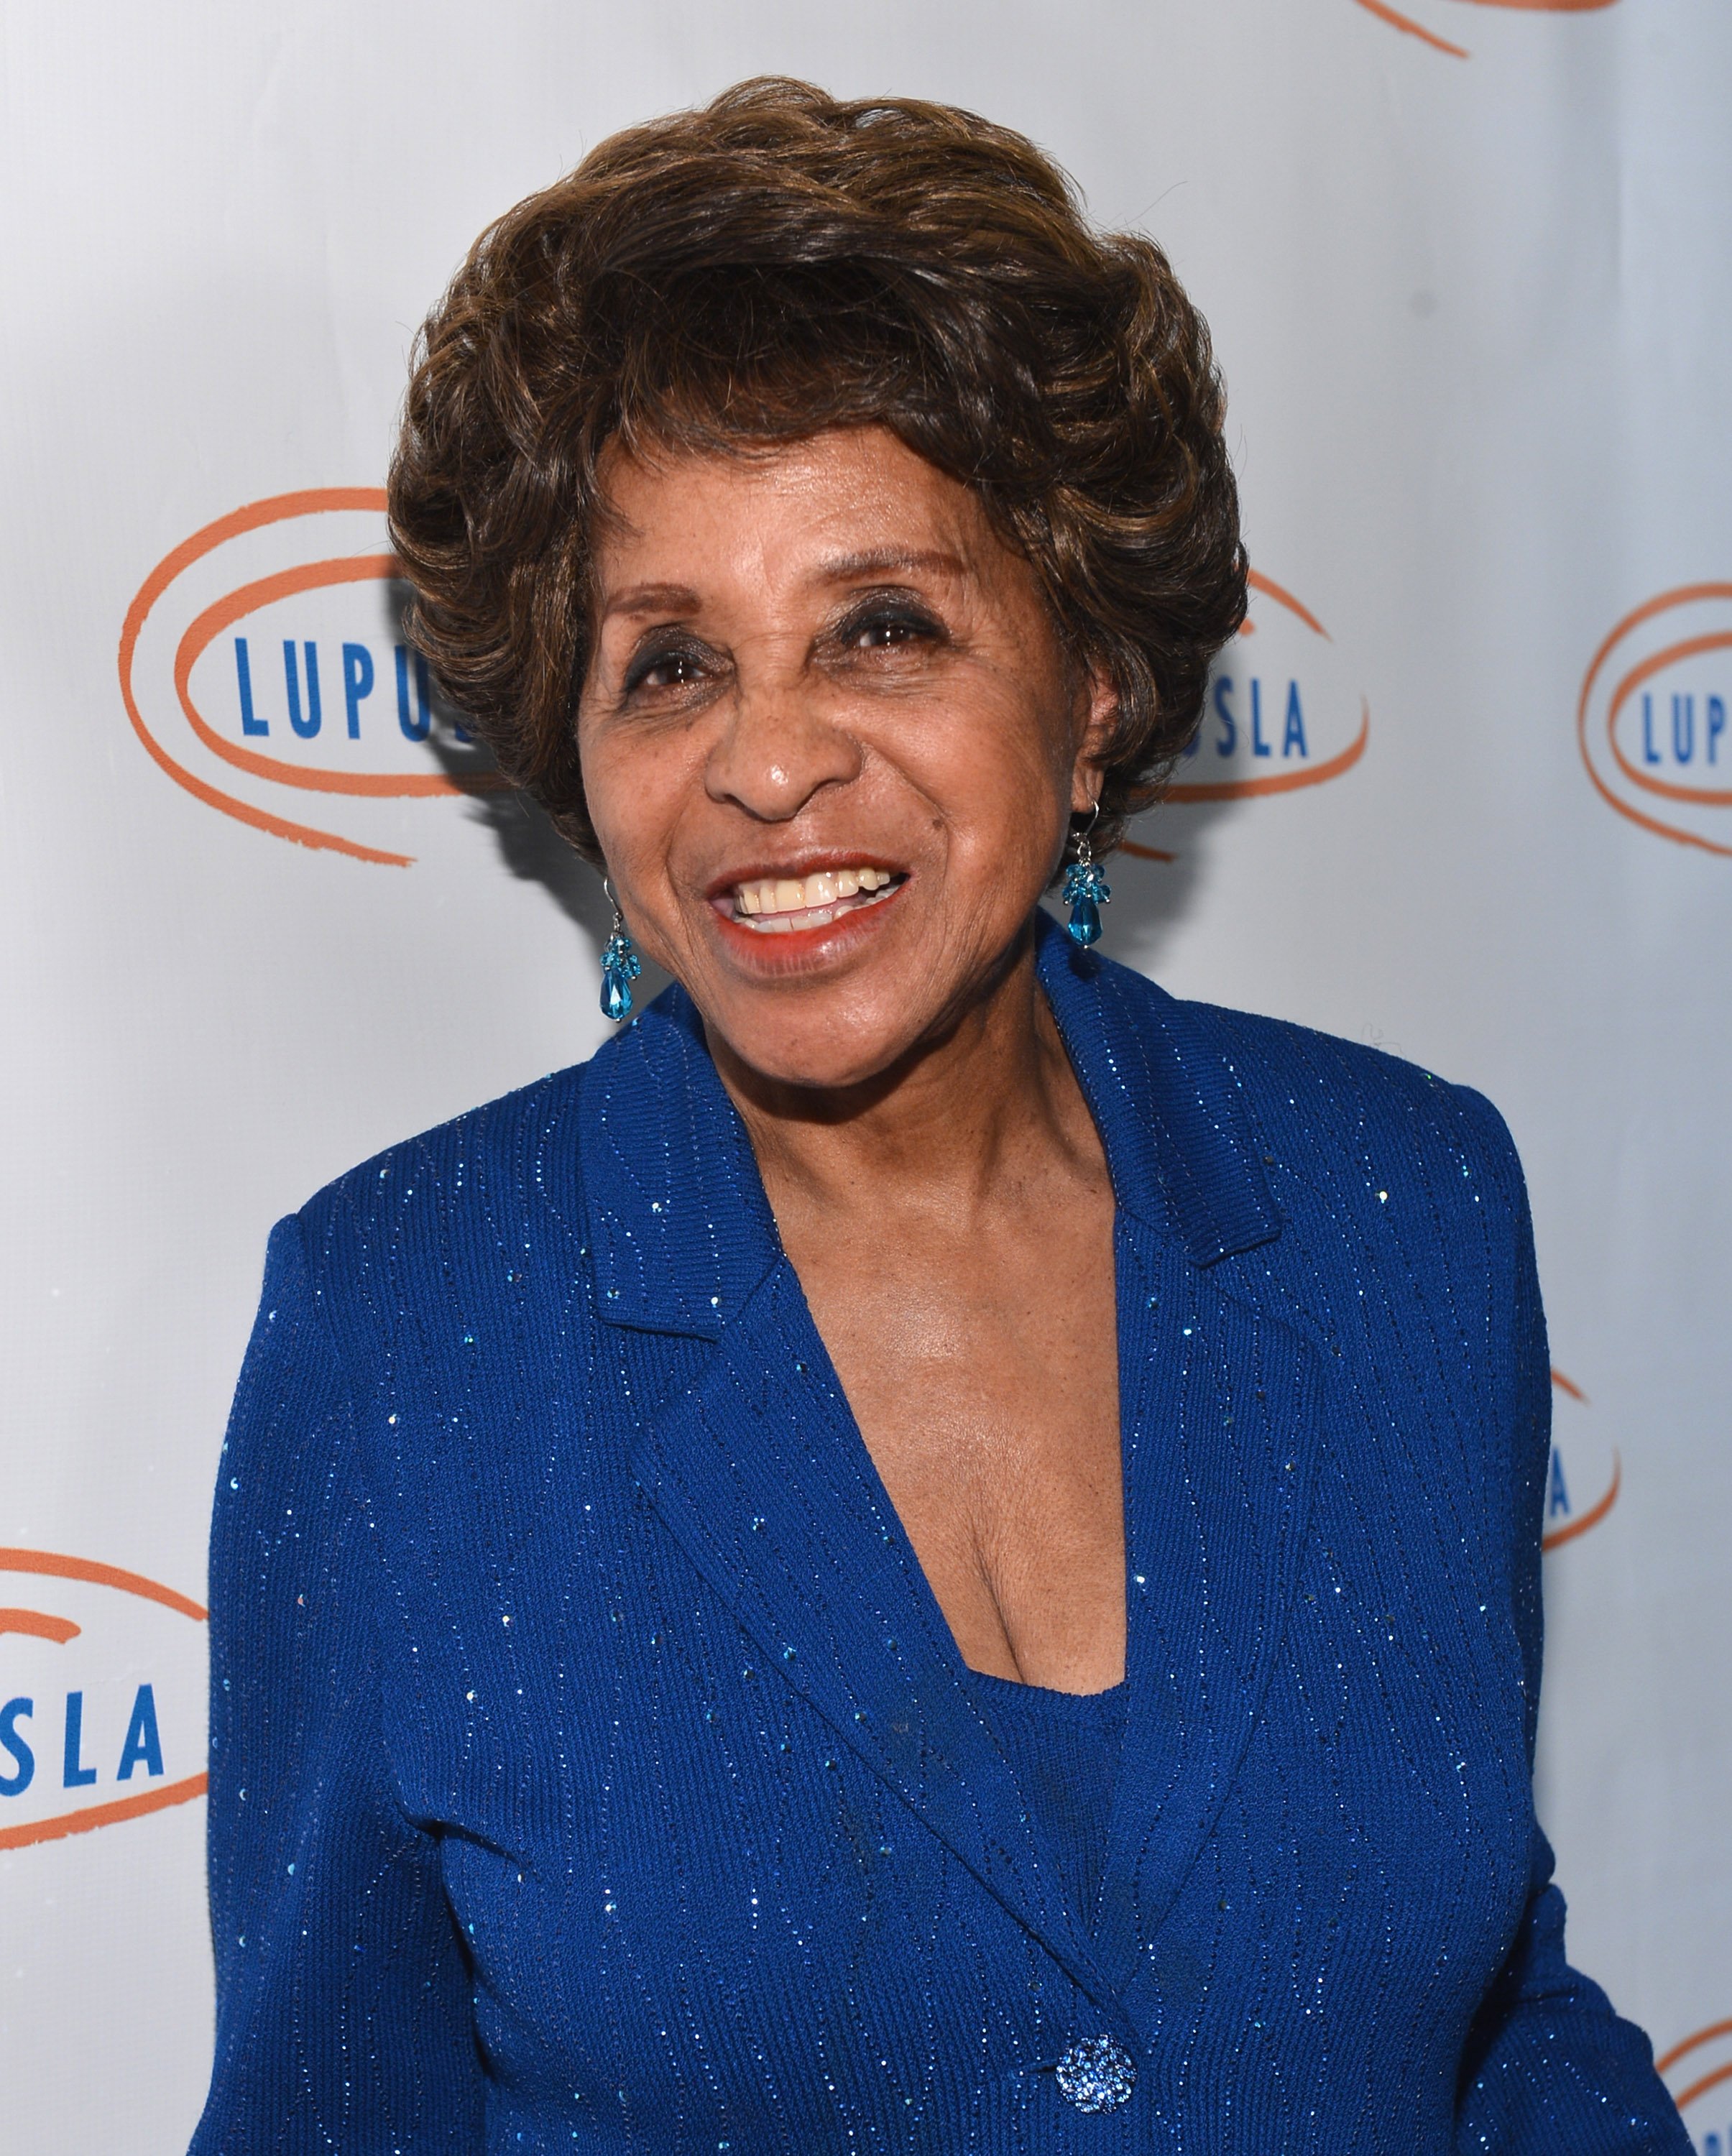 Marla Gibbs at the Lupus LA 10th Anniversary Hollywood Bag Ladies Luncheon on Nov. 1, 2012 in California | Photo: Getty Images